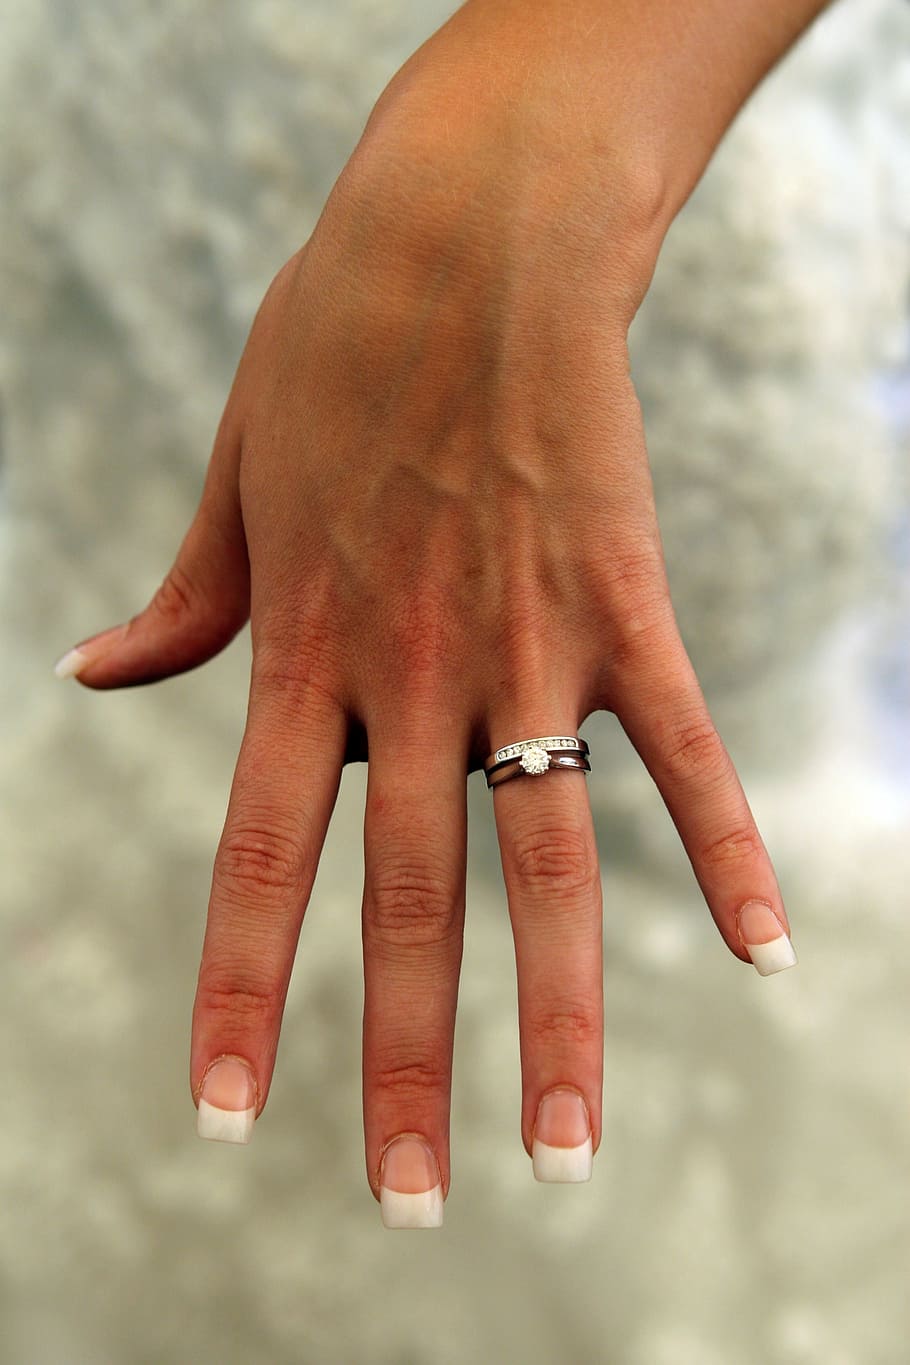 person wearing silver-colored bridal rings, affair, anniversary